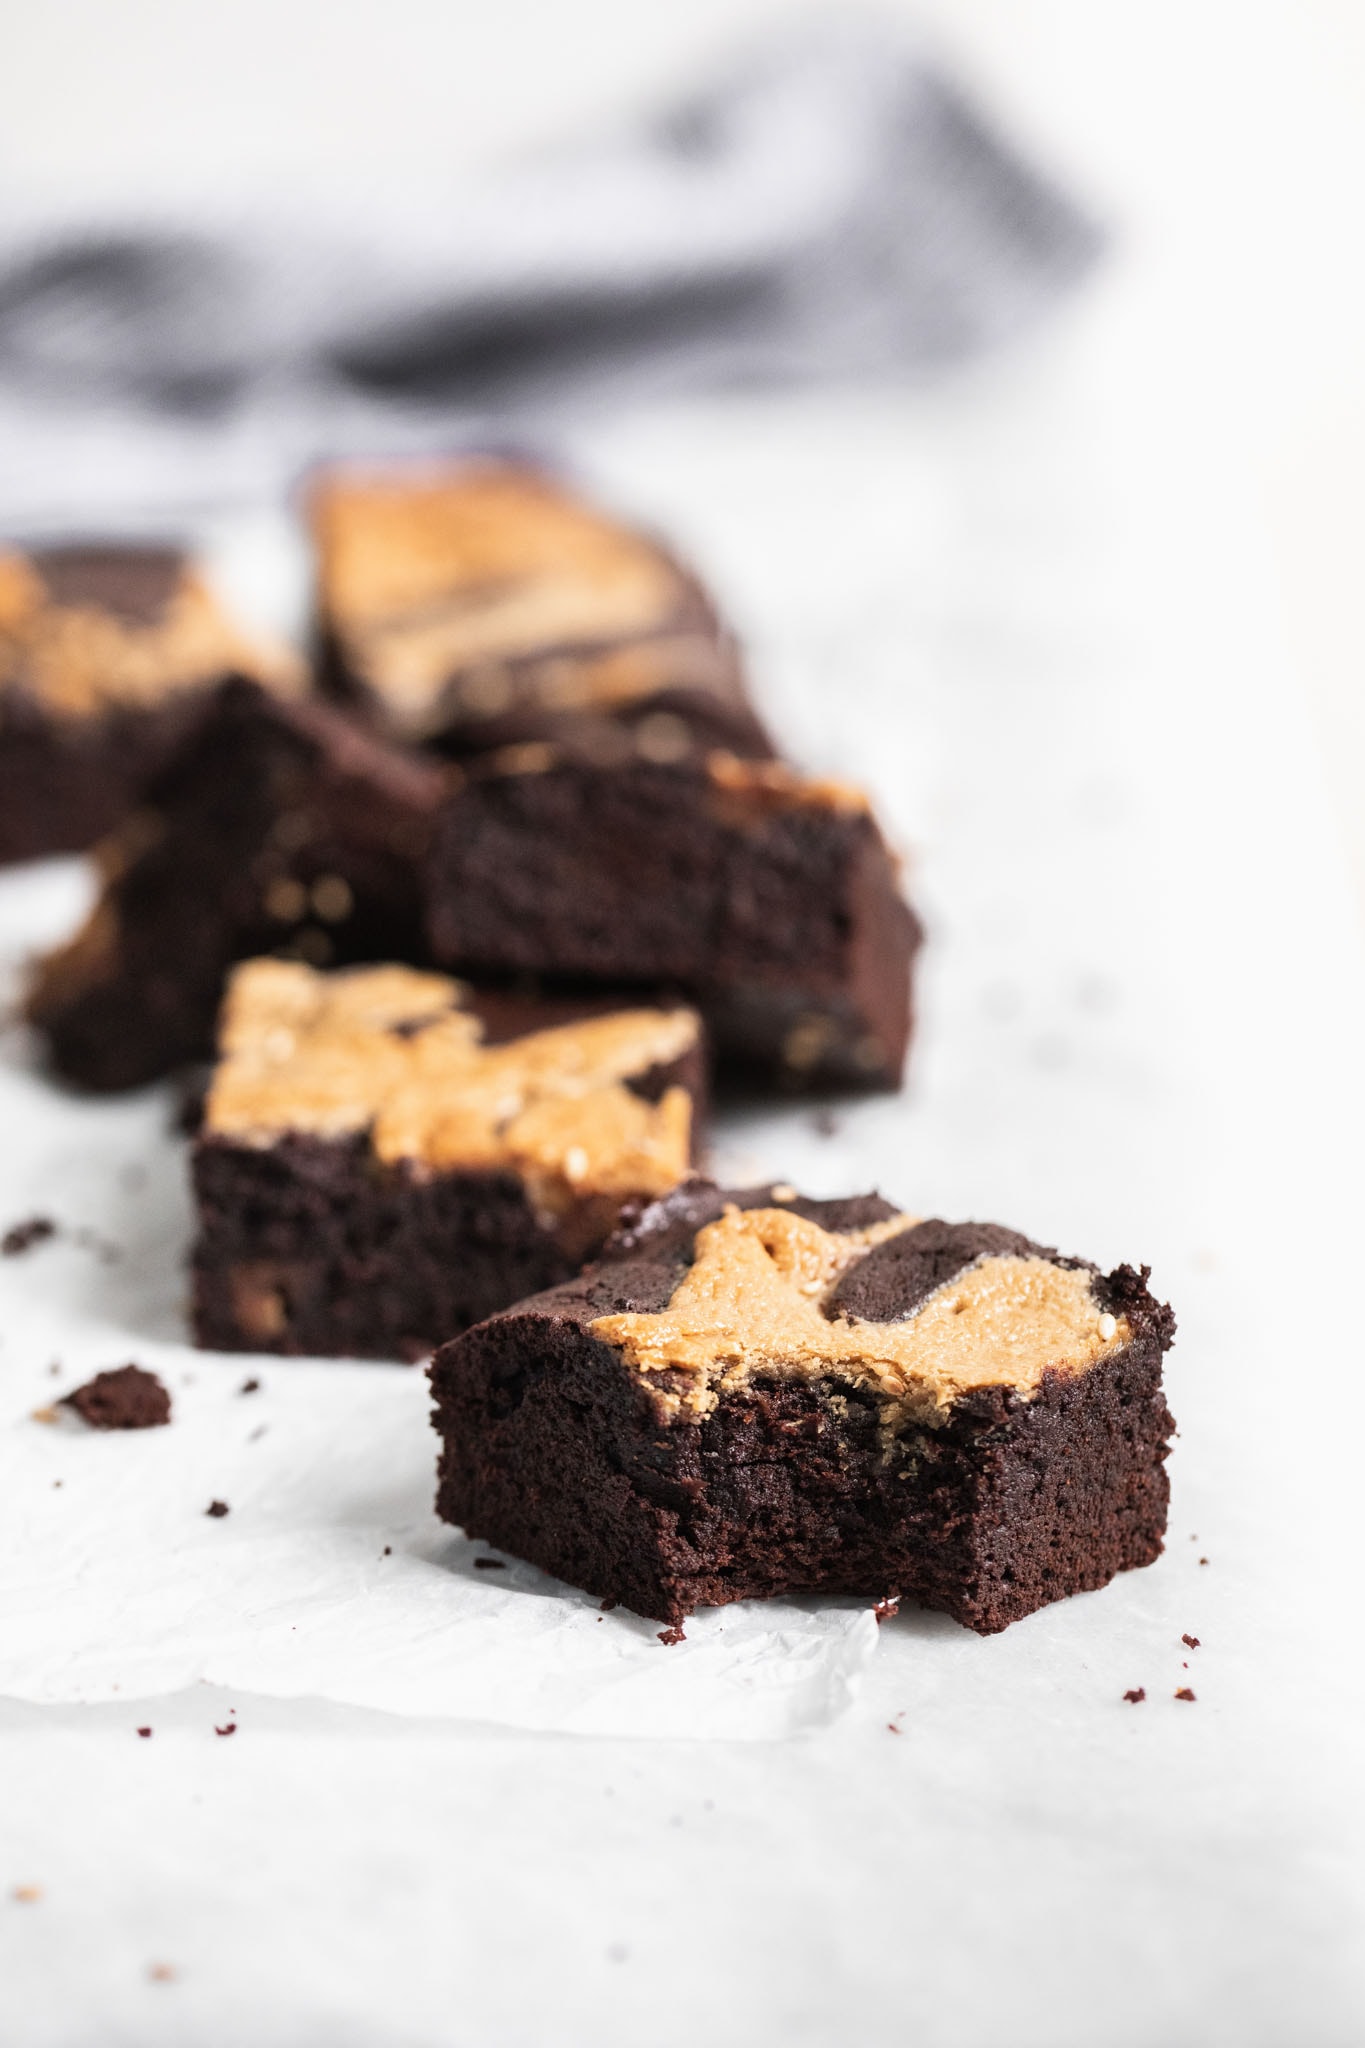 Introducing Halva Brownies AKA thick fudgy brownies swirled with ribbons of halva, my favorite middle eastern confection. Think tahini brownies, but better!